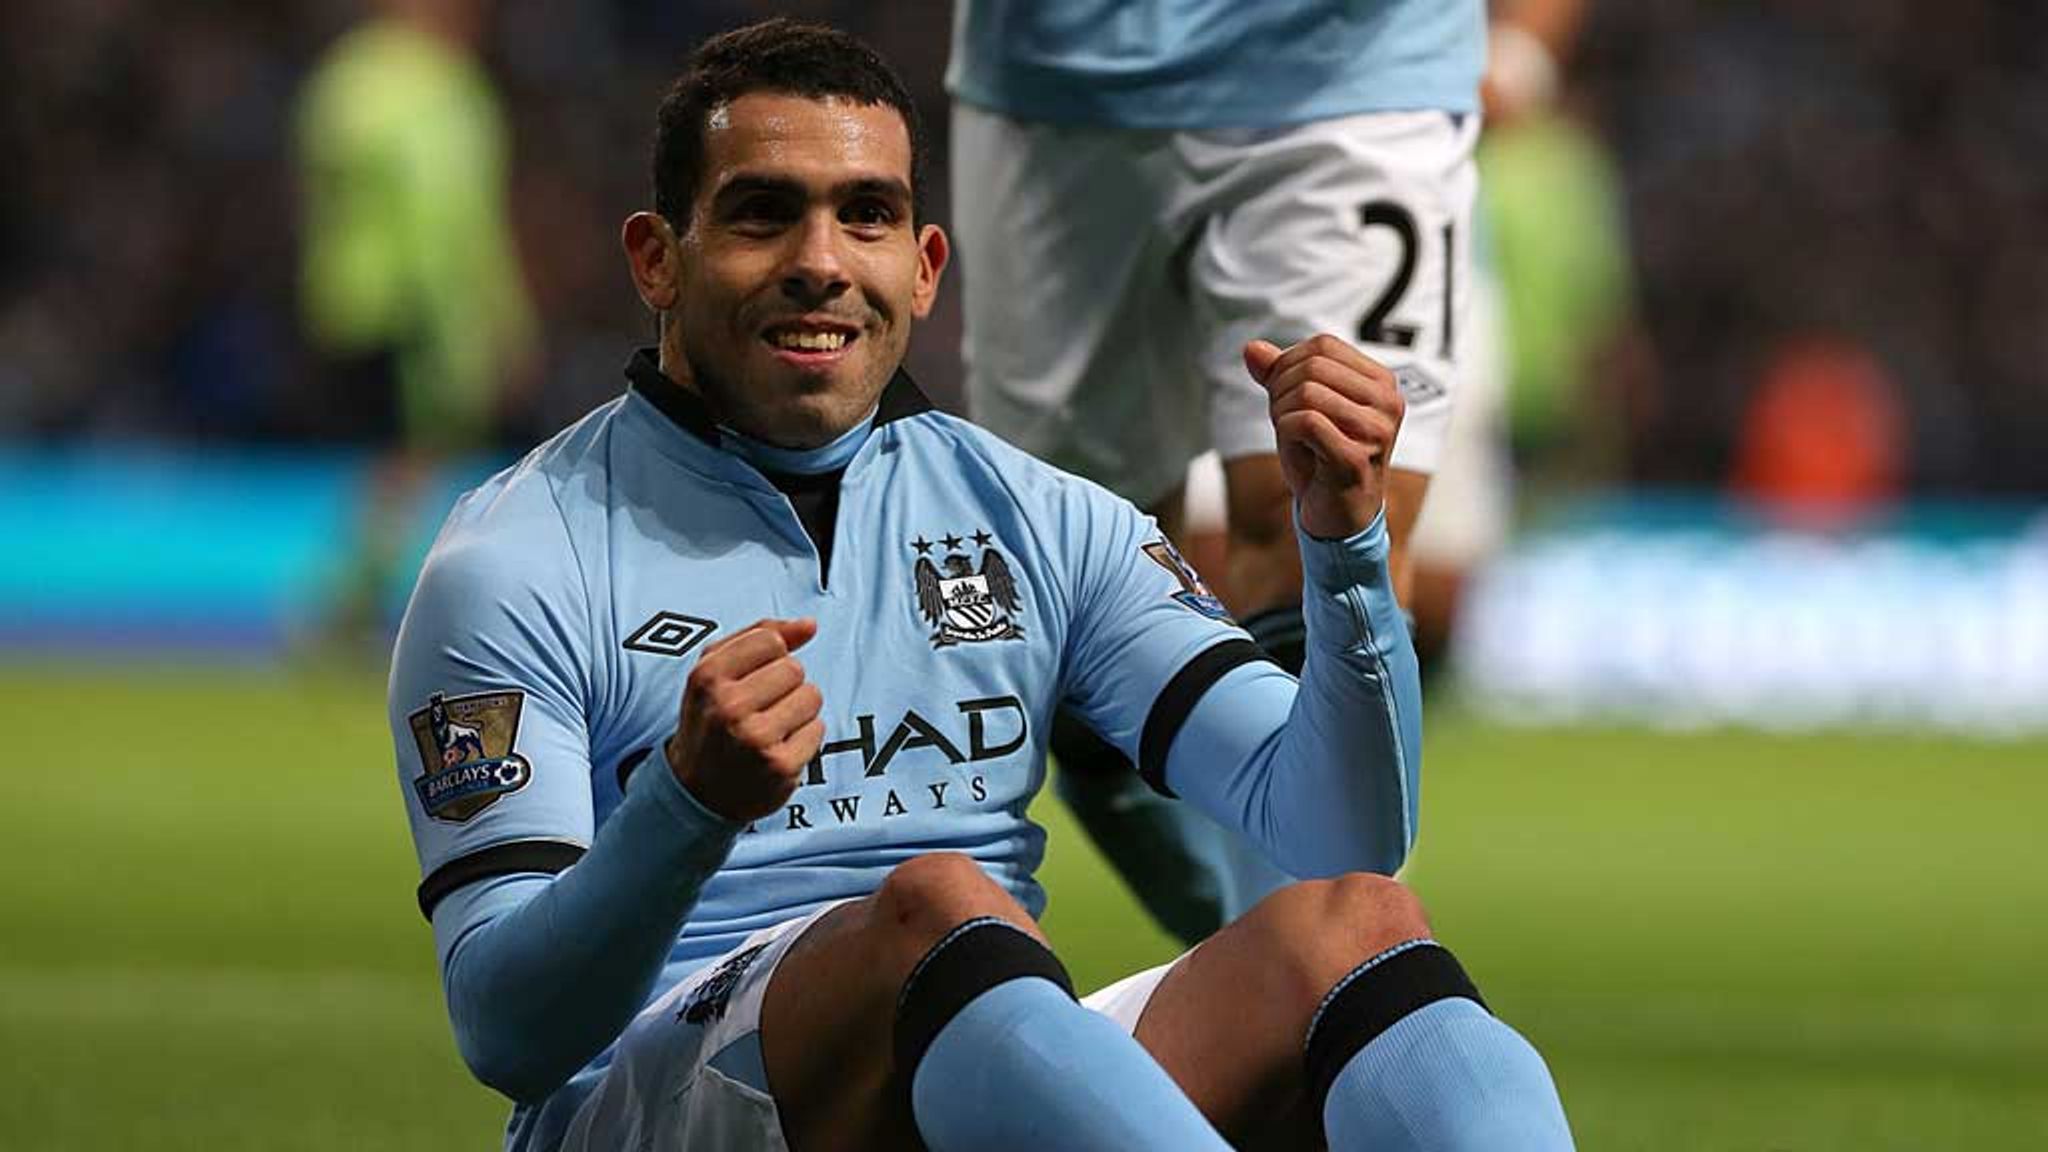 Manchester City's Carlos Tevez admits he would like to play for Boca Juniors | Football News | Sky Sports